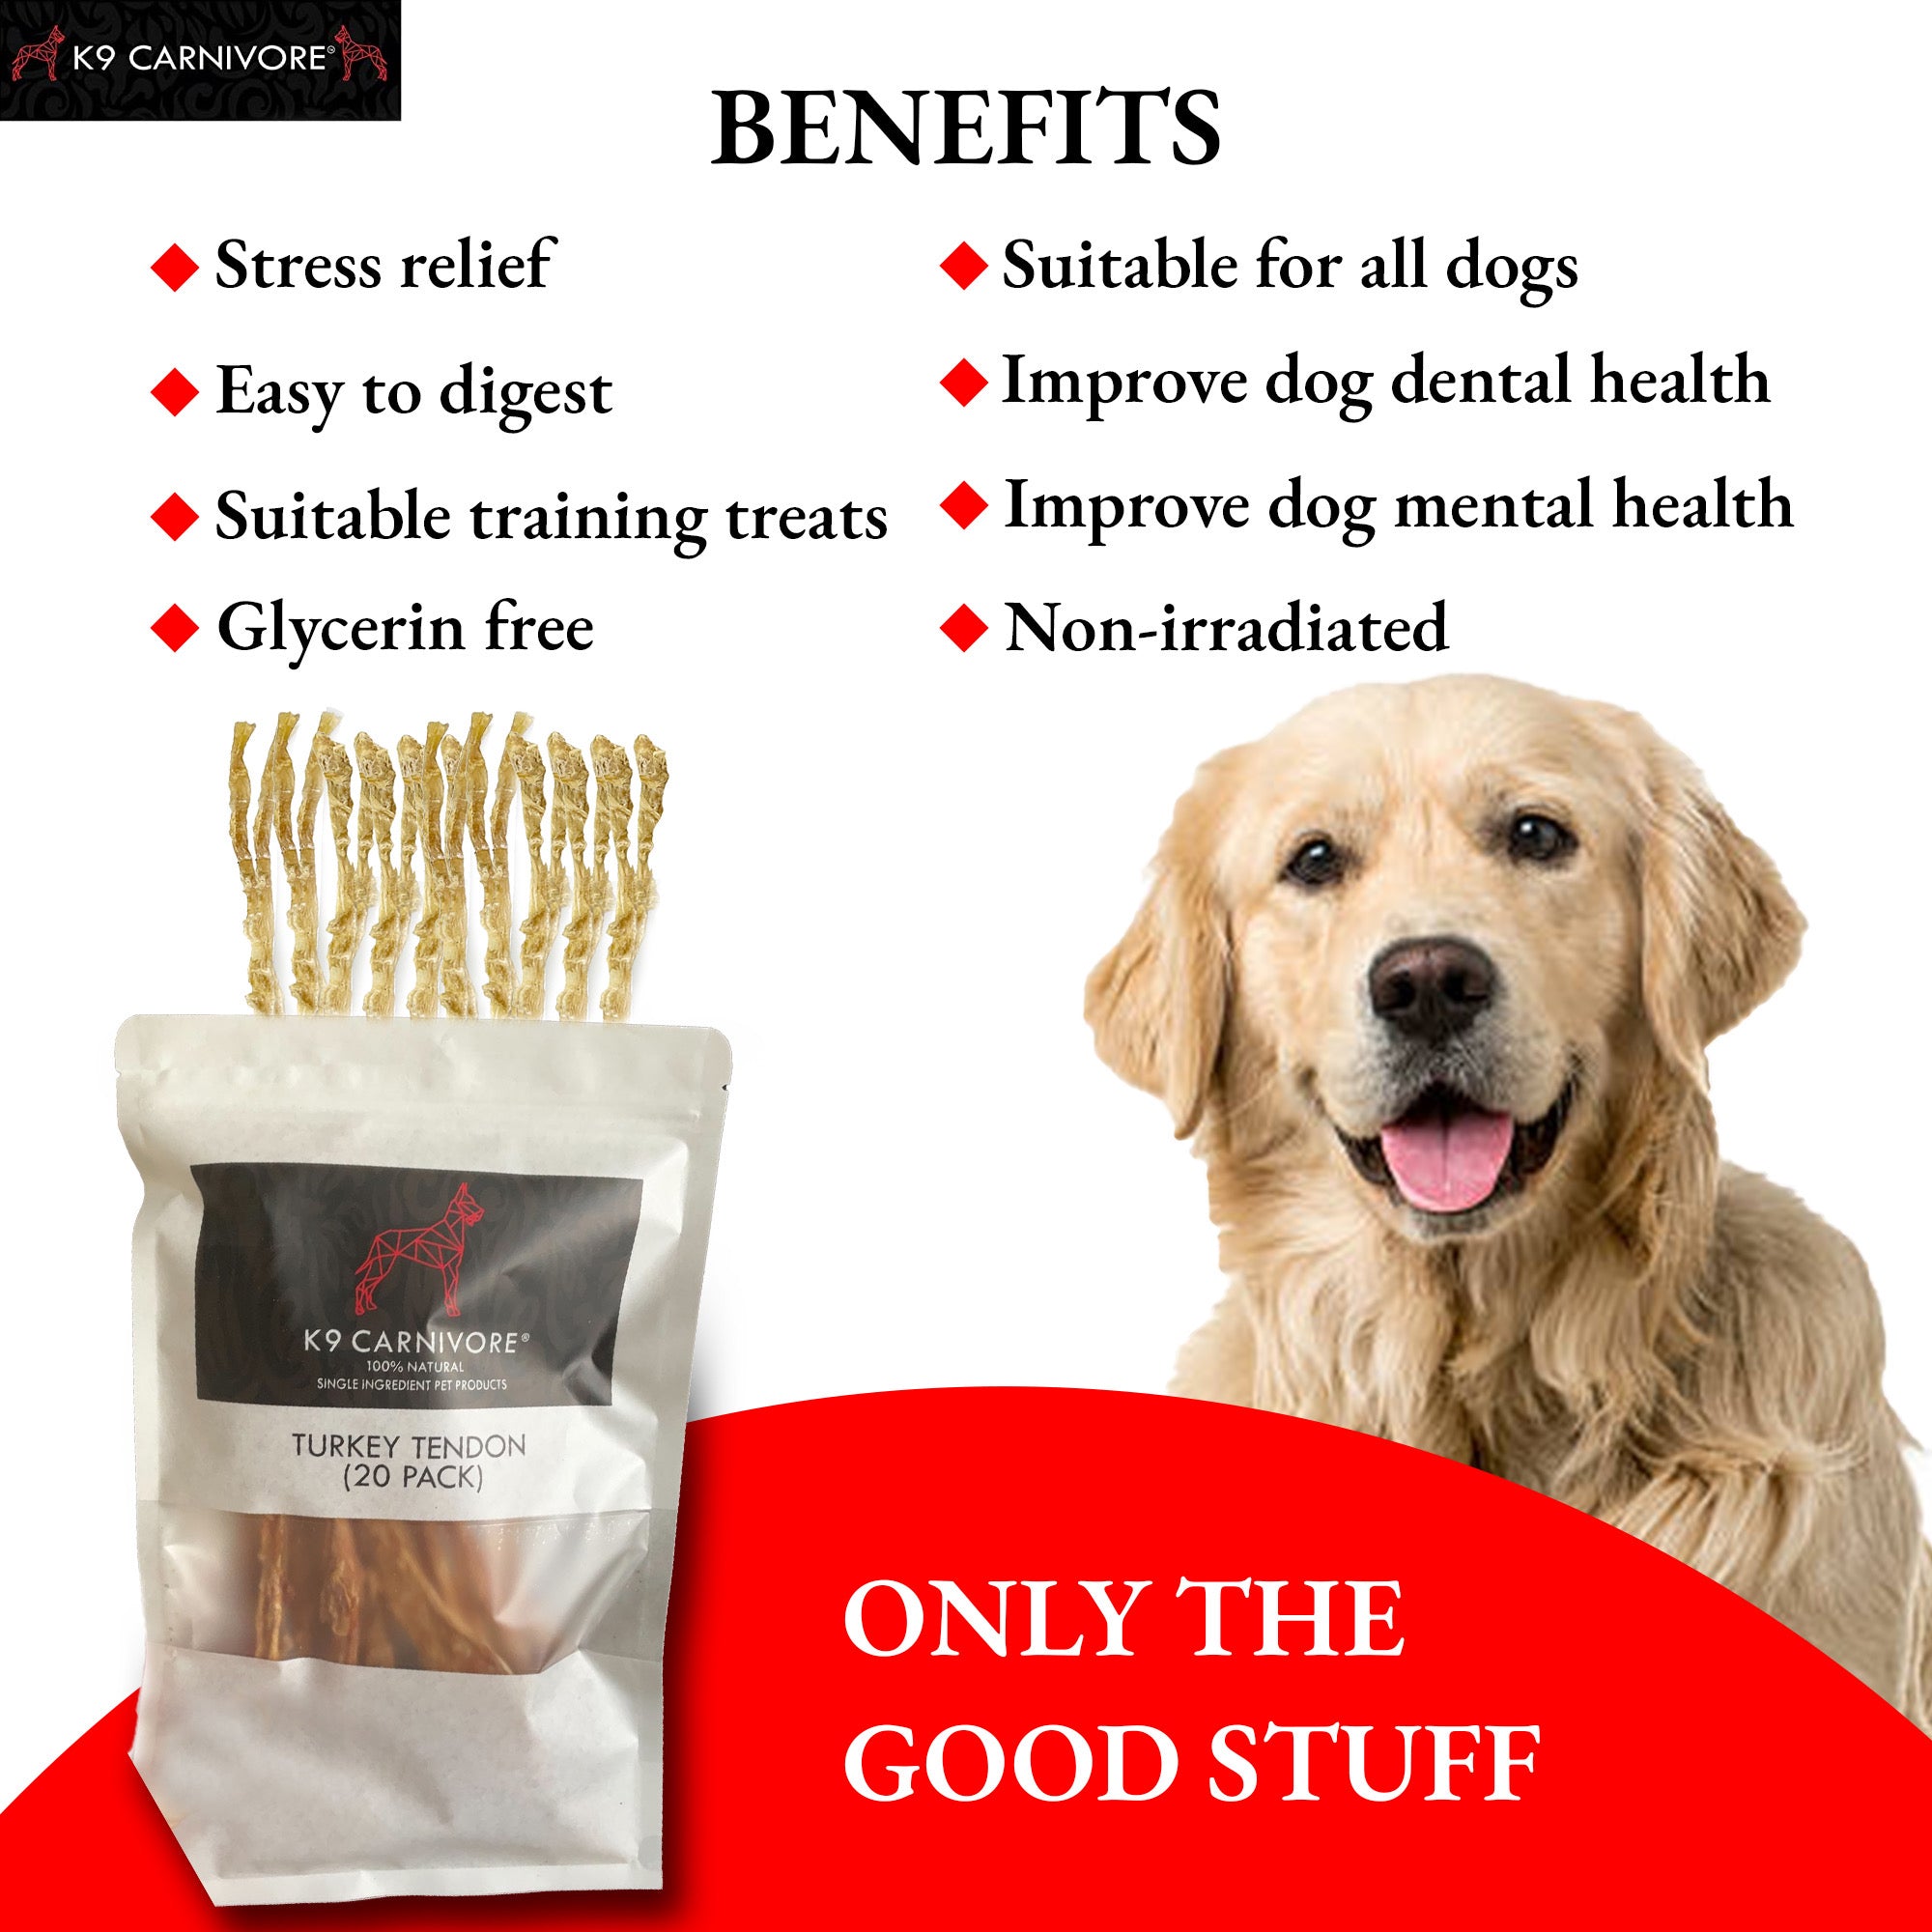 The Power of Natural Dog Treats: Why You Should Switch to Turkey Tendon for Your Dog